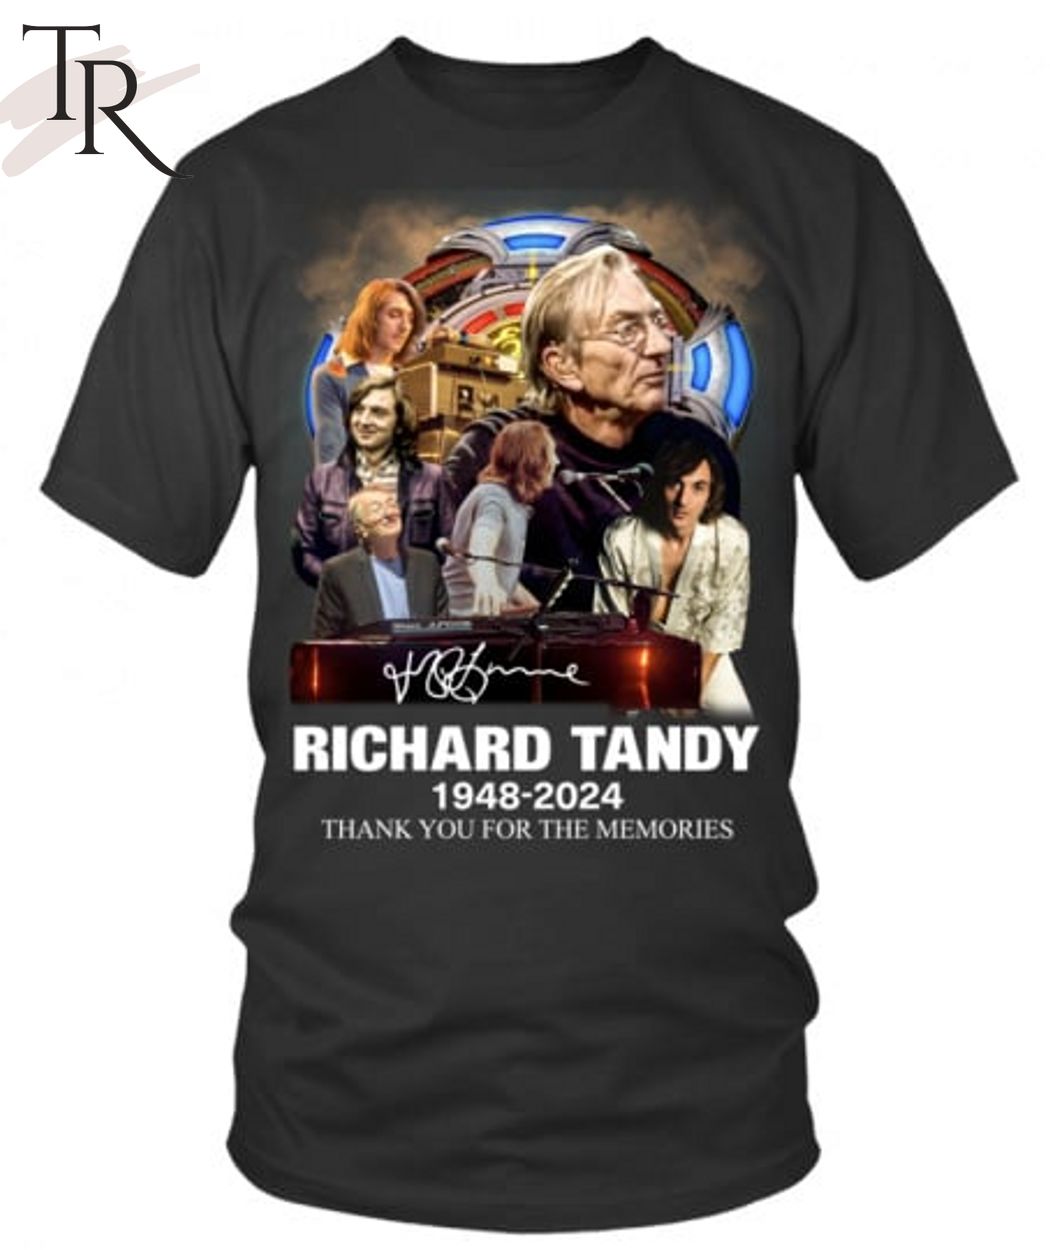 Richard Tandy 1948-2024 Thank You For The Memories T-Shirt